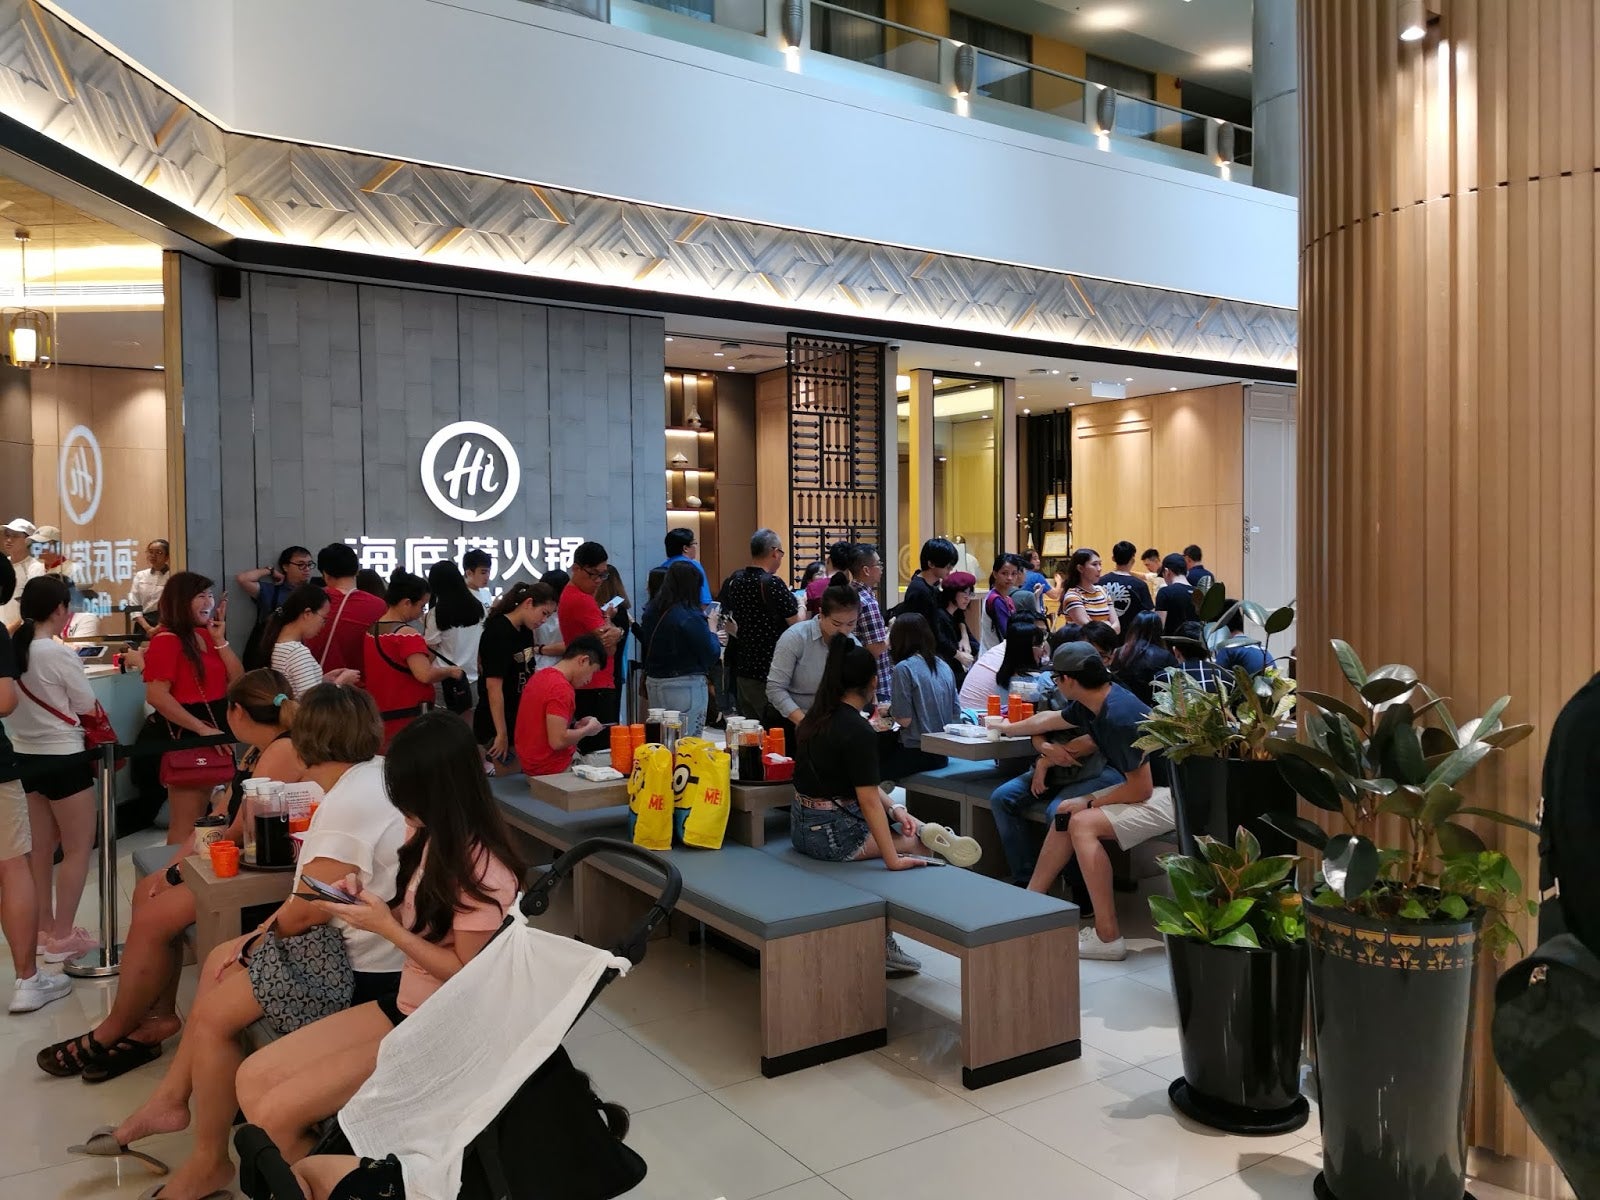 Haidilao Malaysia Now Has Online Queue Service So You Don't Have To Waste Your Time In A Line! - World Of Buzz 4